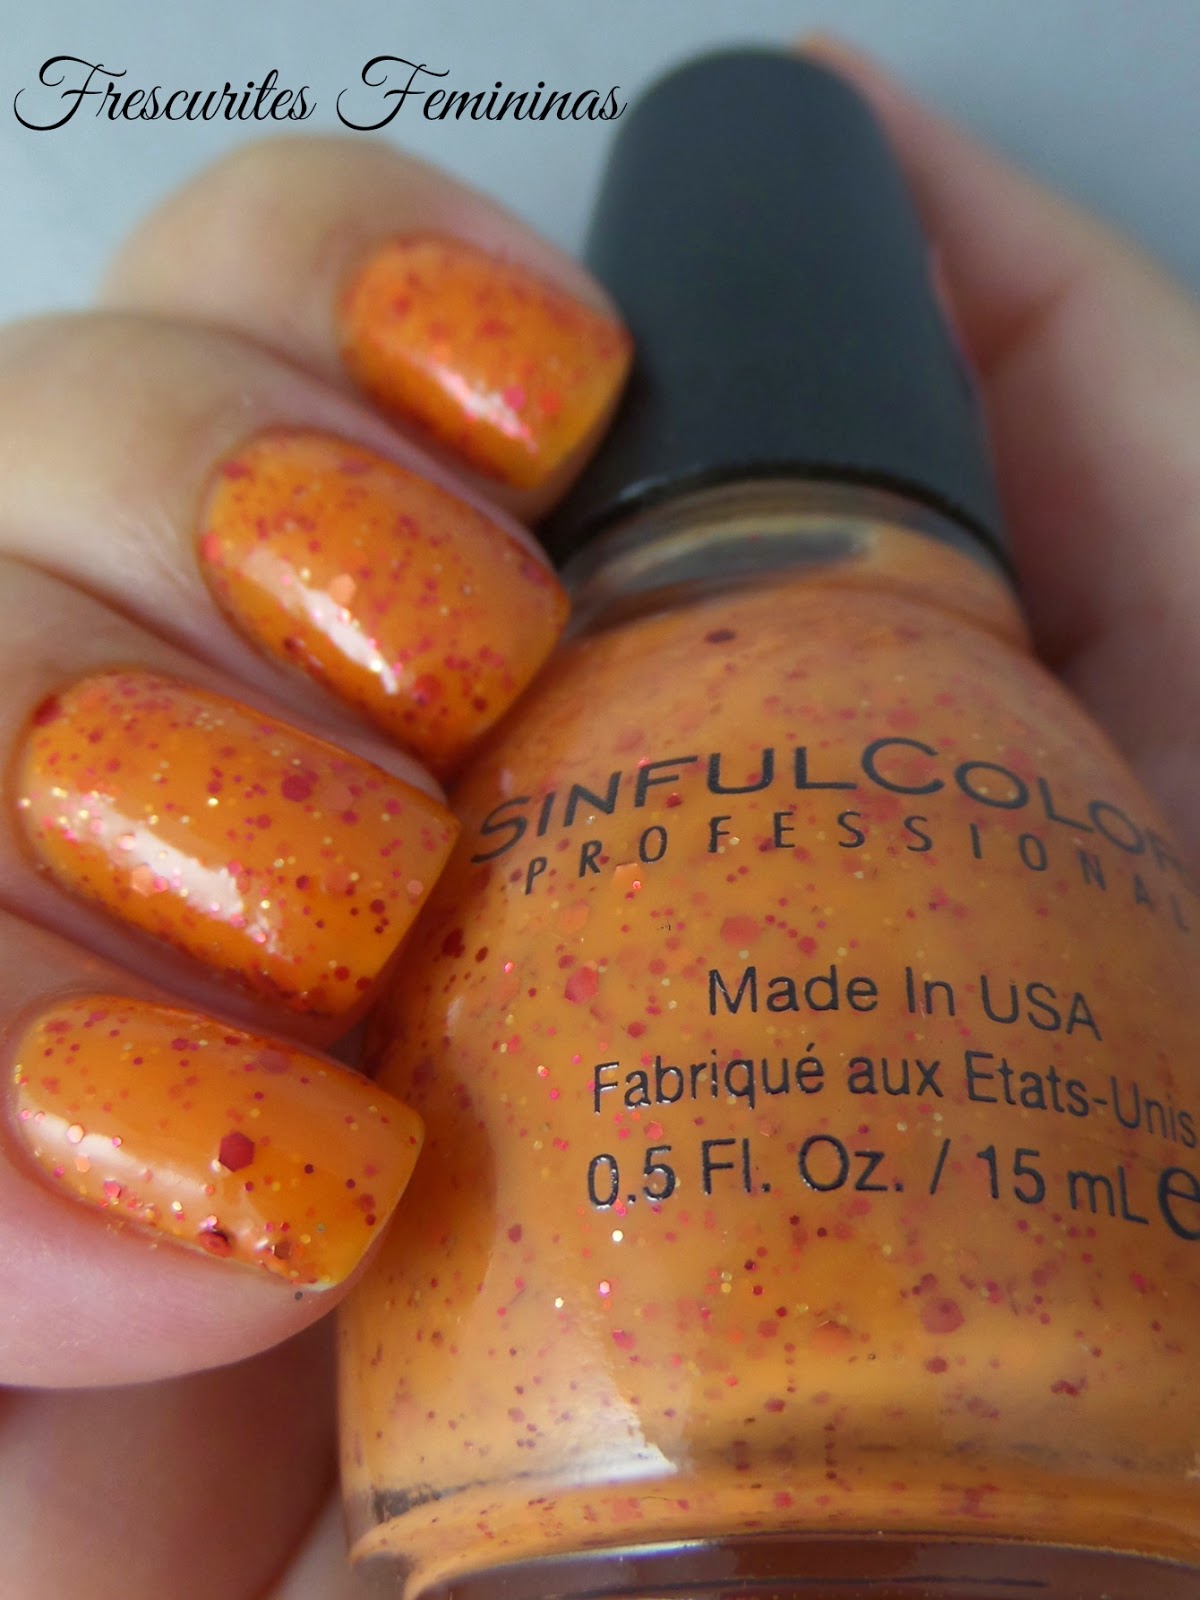 Sinful, Colors, Frescurites, Femininas, Standing, Bloom, Only, Nails, Nail, Polish, Esmalte